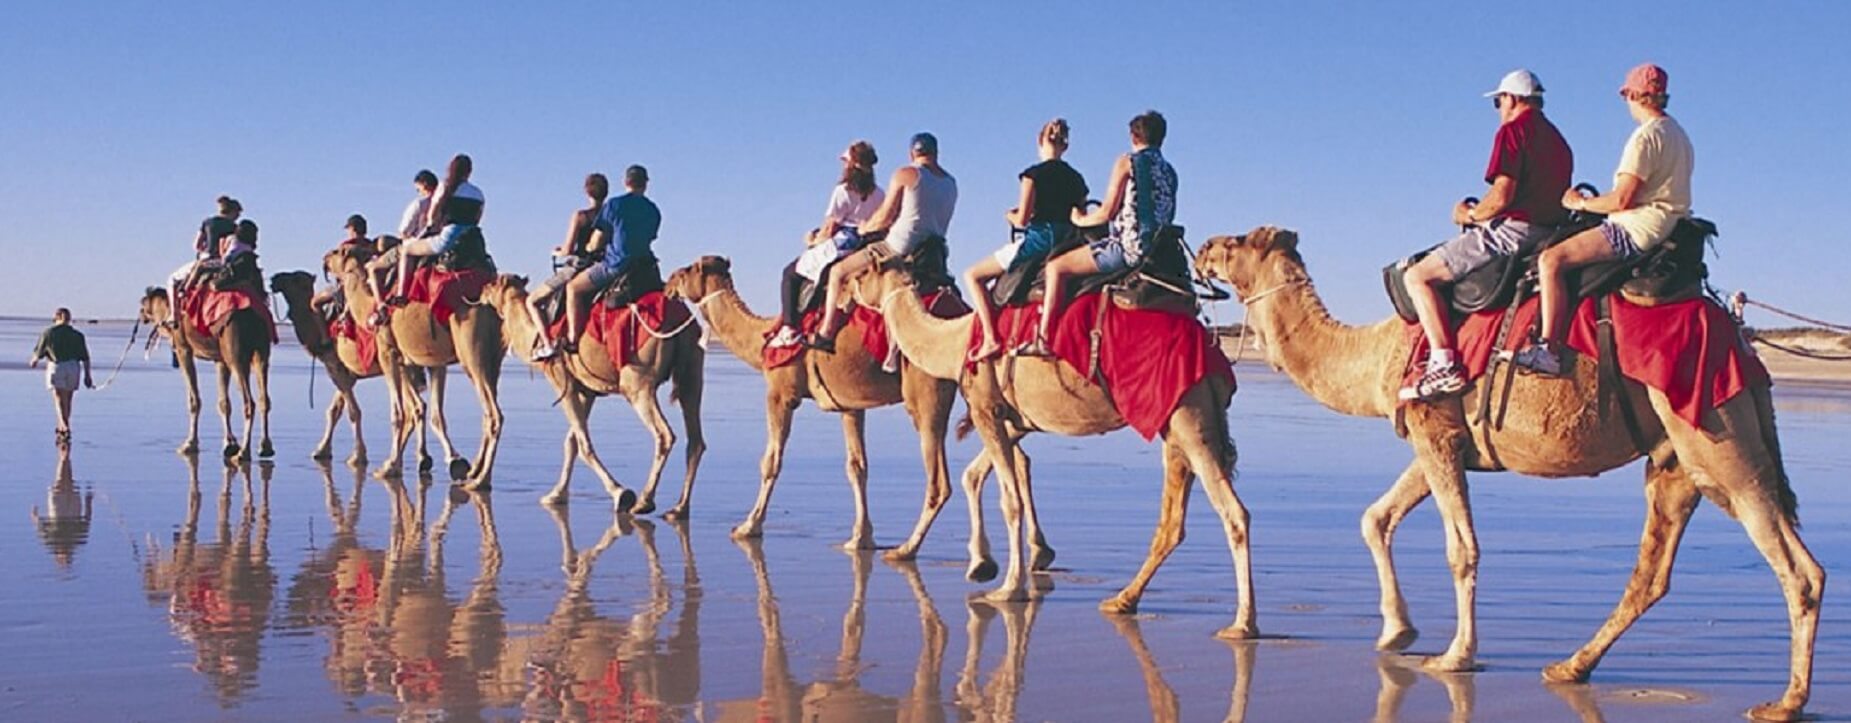 Incentive Marrakech, Incentive morocco <br>camels riding